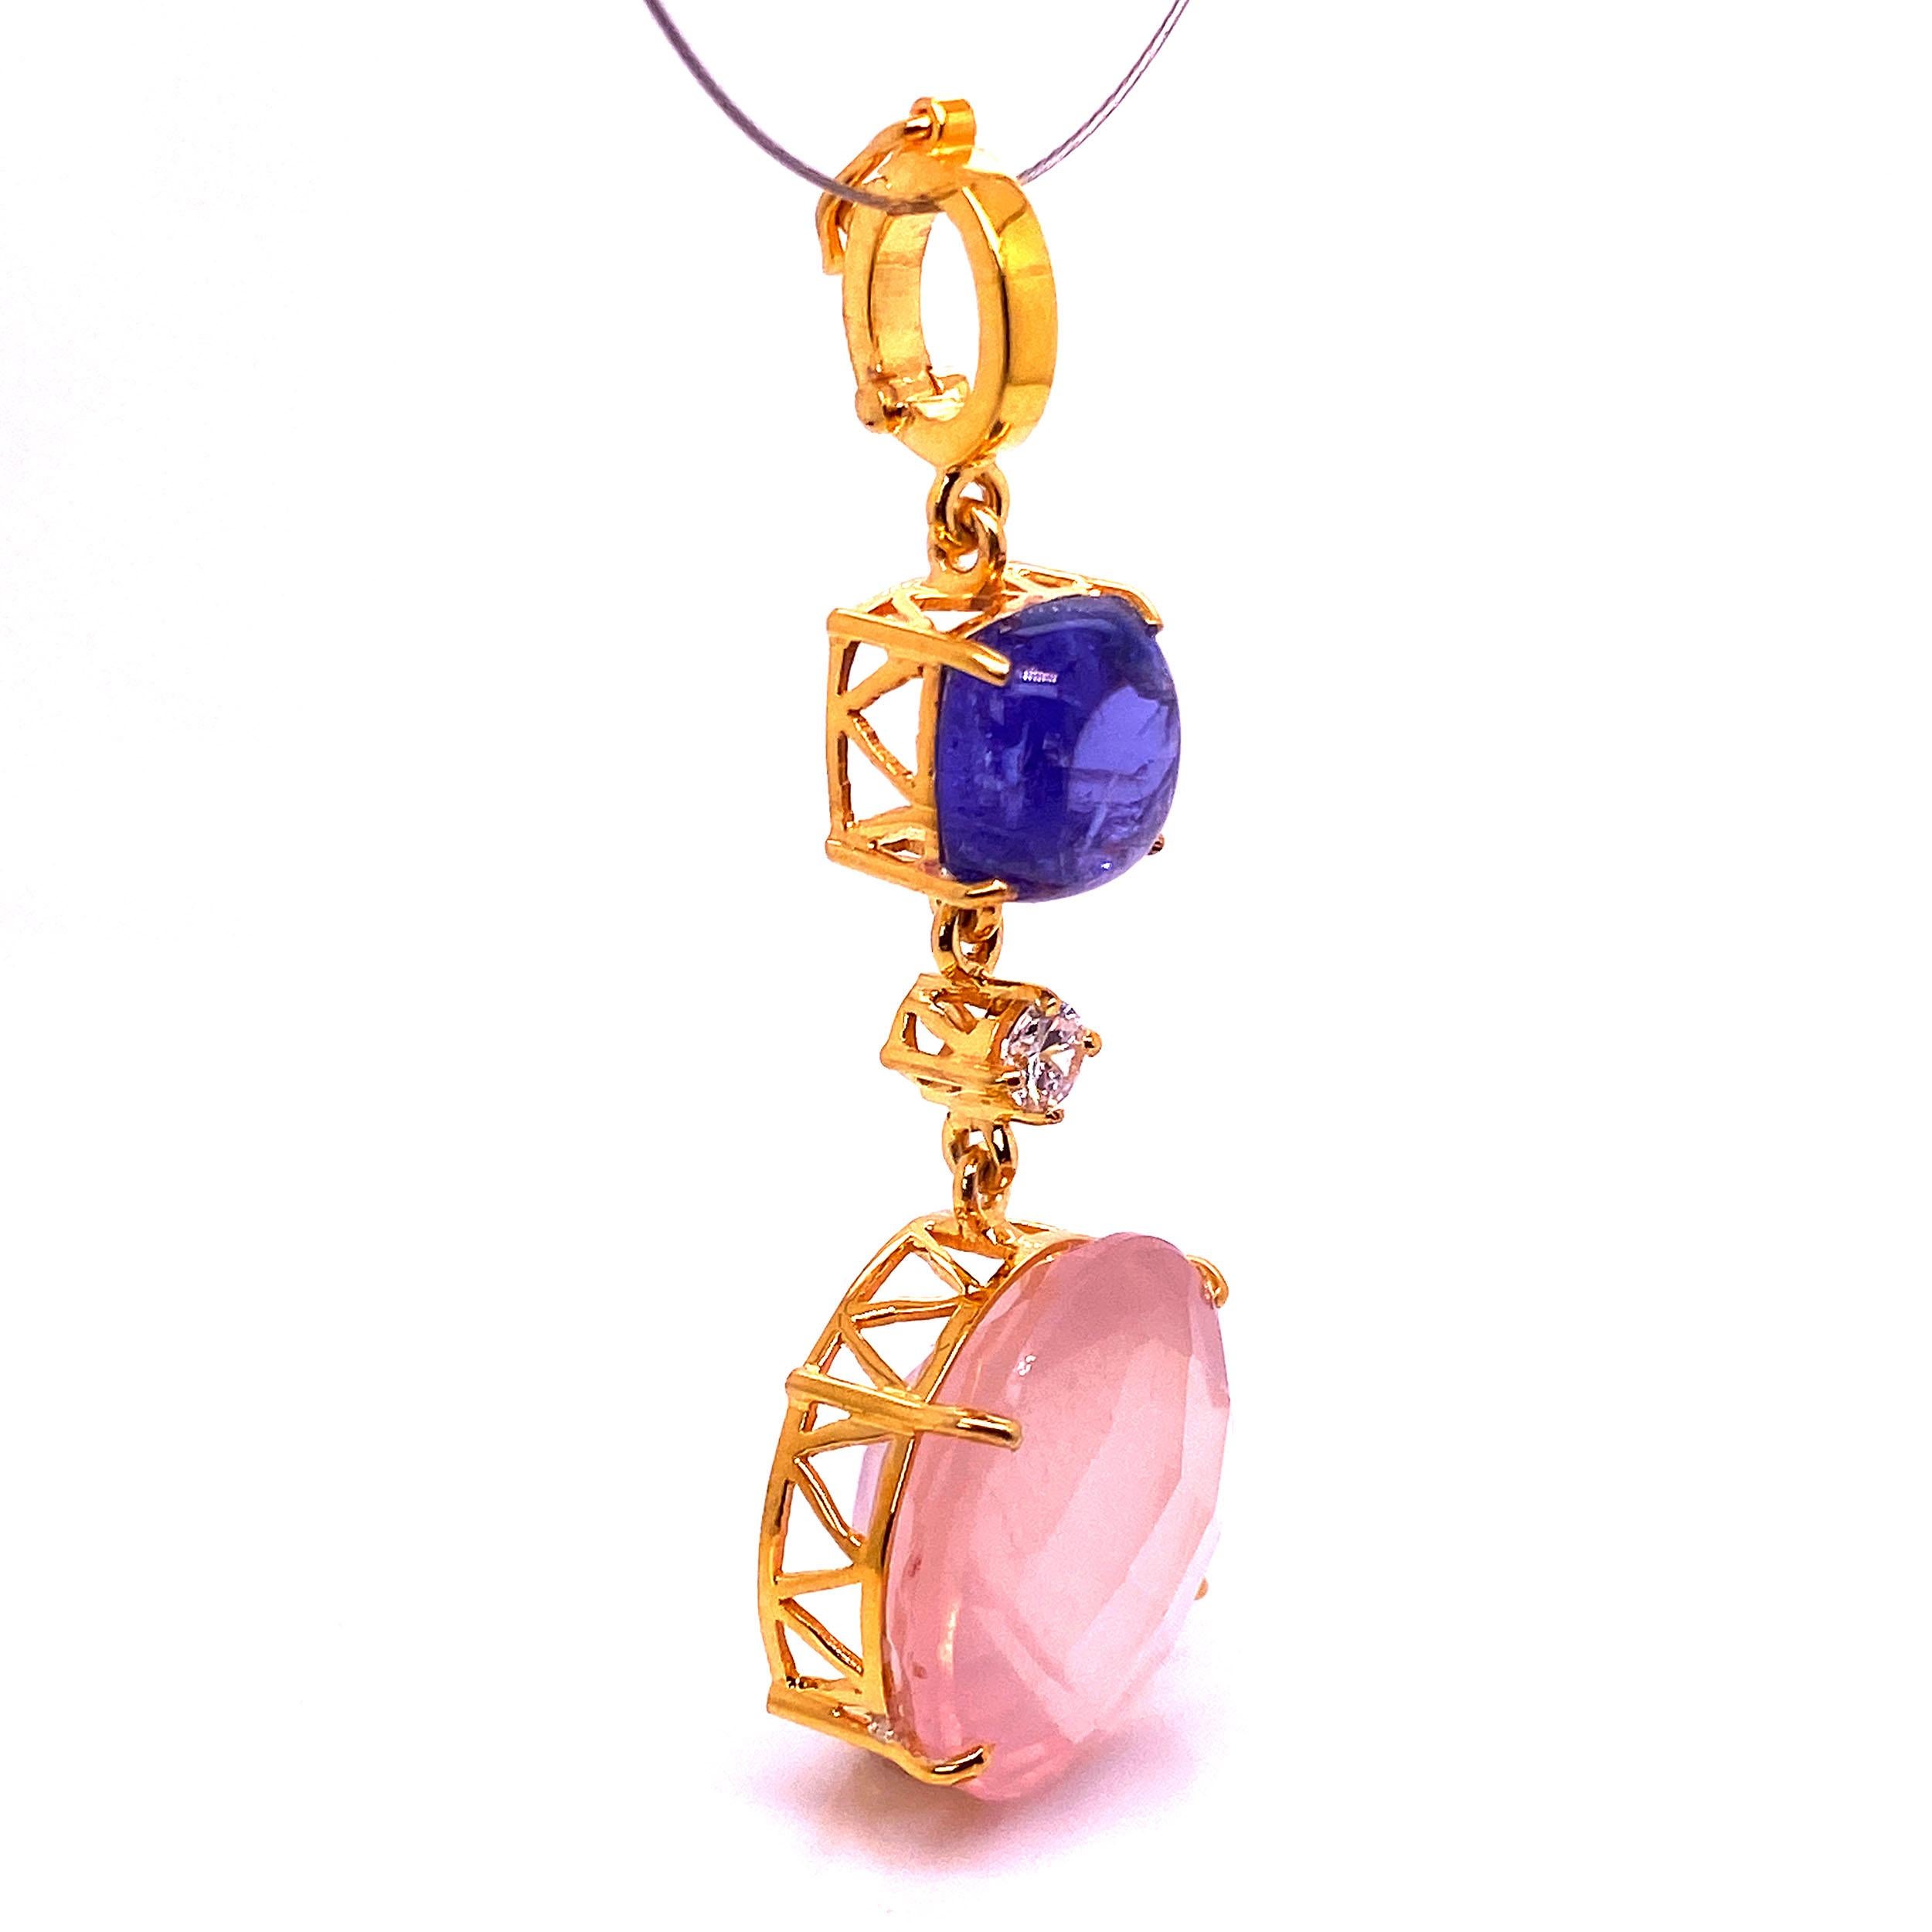 One of a kind, Rose Quartz and Tanzanite Pendant set in gold rhodium plated Sterling Silver.  This unique Gemjunky pendant is 2.25 inches in length from its hinged bail to the base of the round 20.44 carat checkerboard table Rose Quartz.  The 5.57